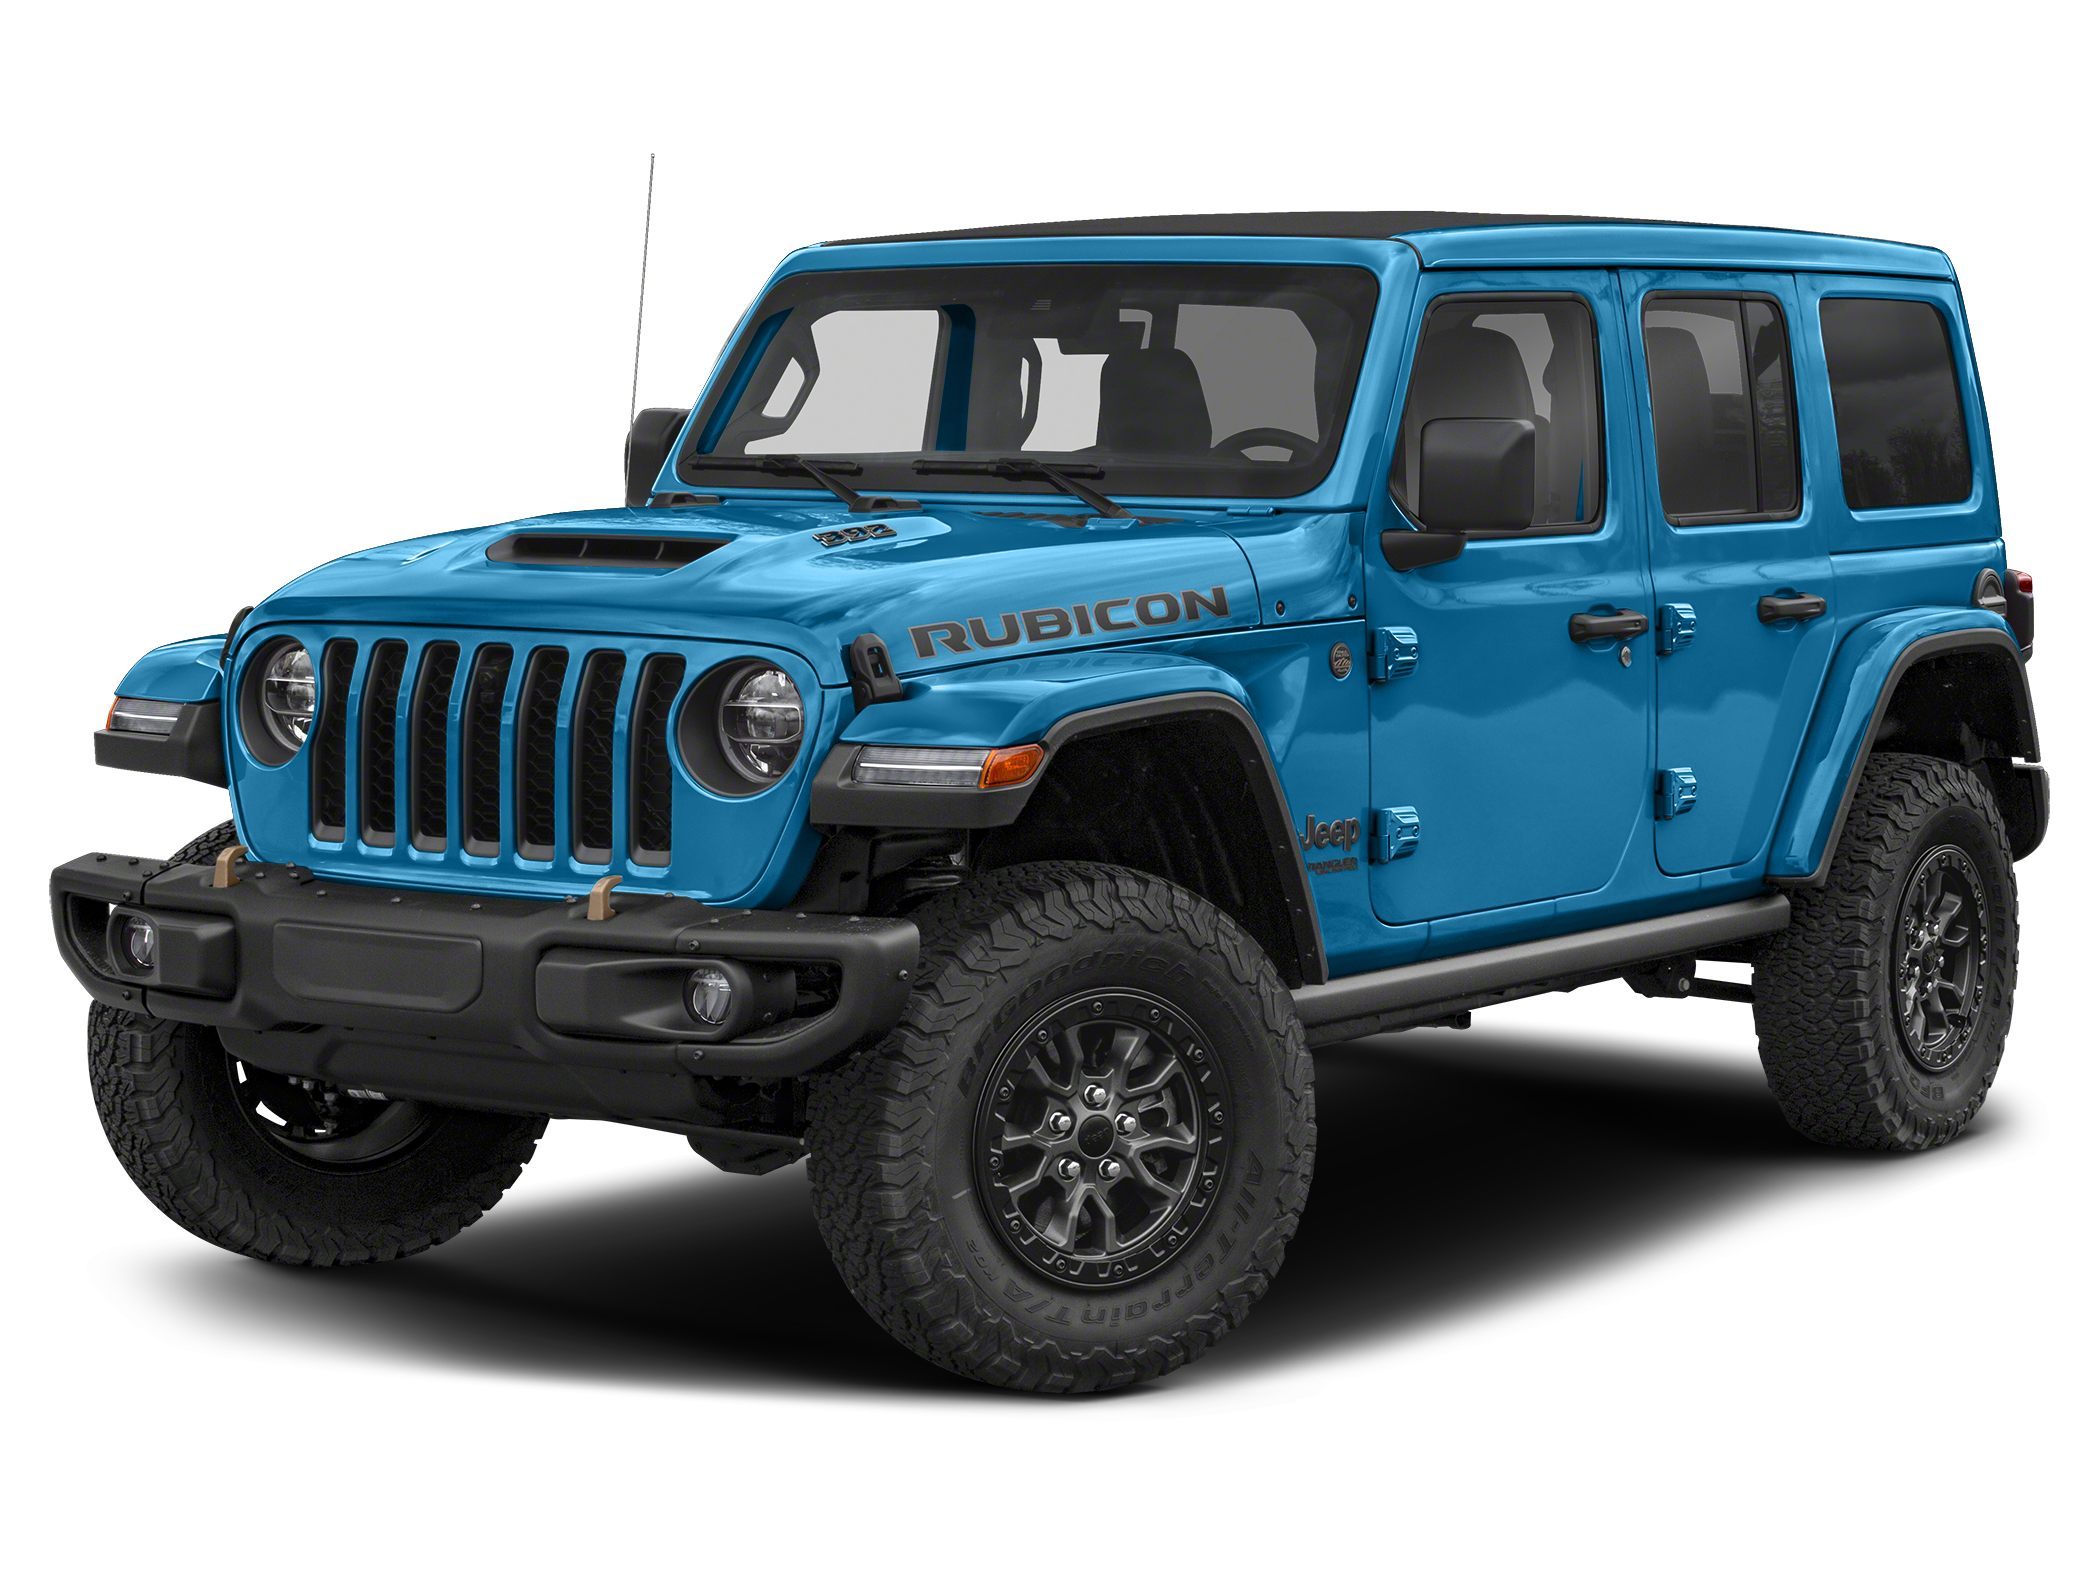 New 2022 Jeep Wrangler UNLIMITED RUBICON 392 For Sale | New Castle IN